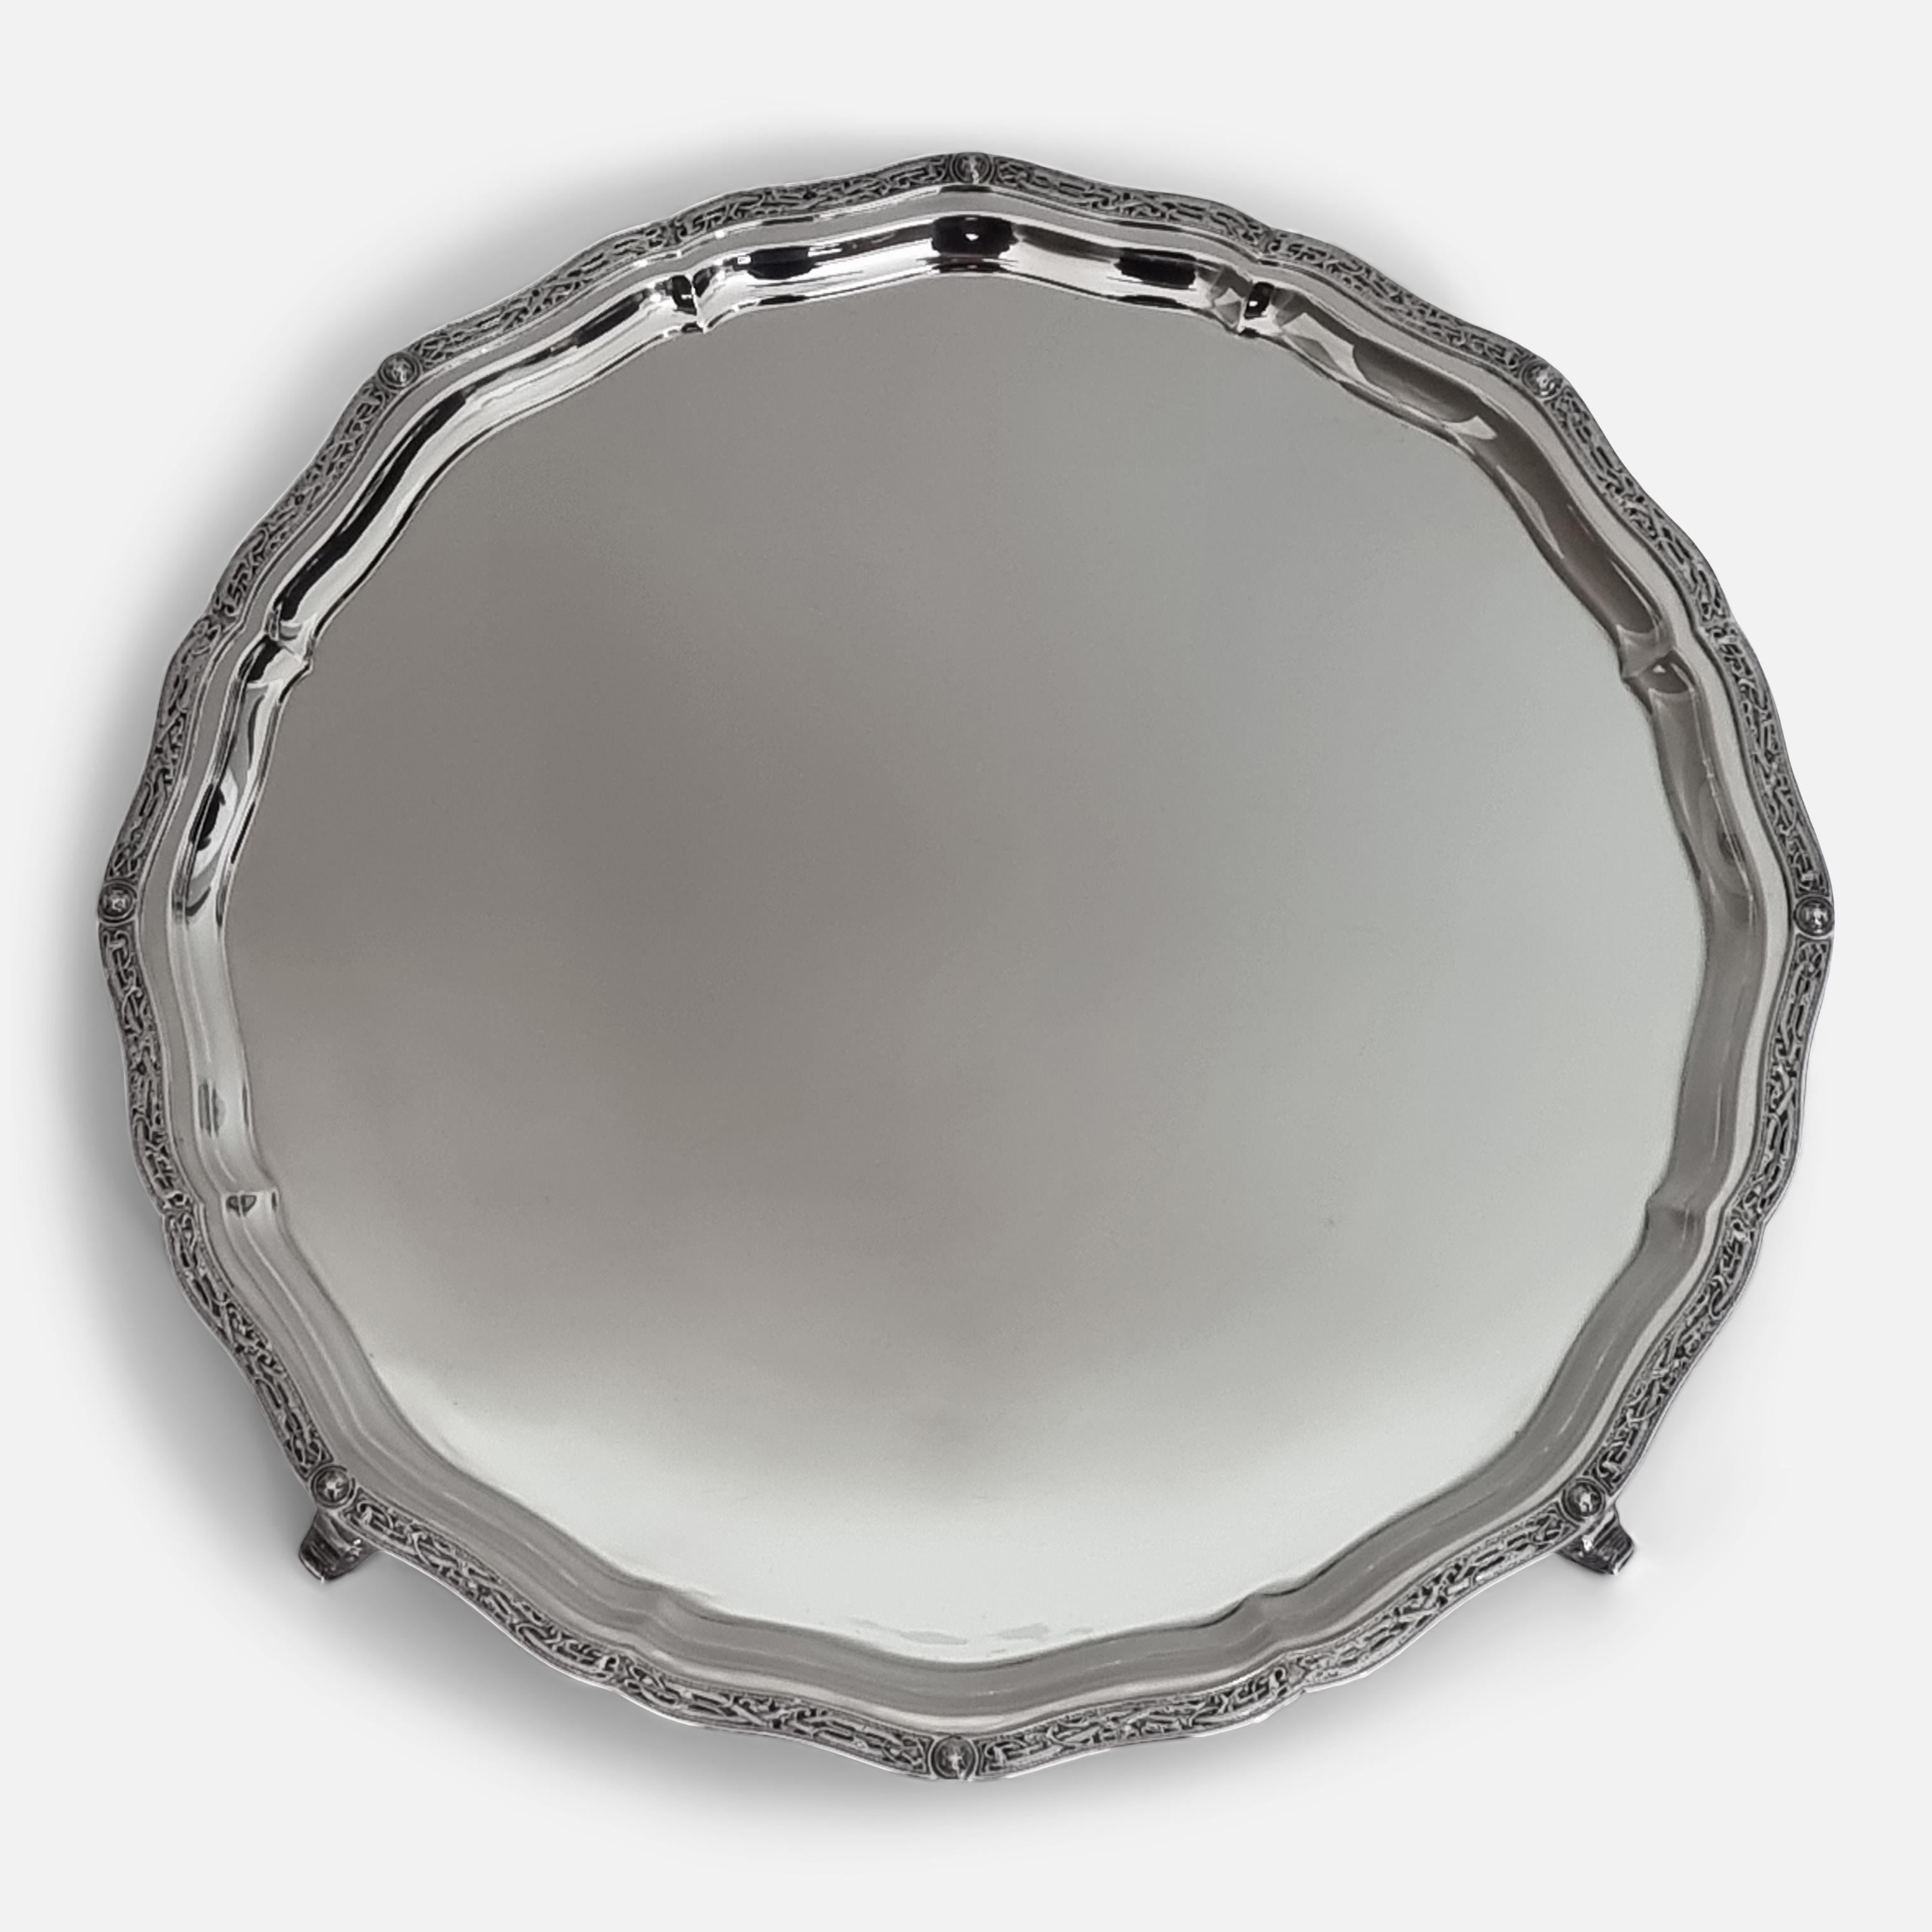 An Elizabeth II Sterling Silver Salver. The salver is of plain ground, with an applied Lindisfarne decoration to the shaped and incurved border, and sitting on four mystical creature feet.

The original associated booklet detailing some of the